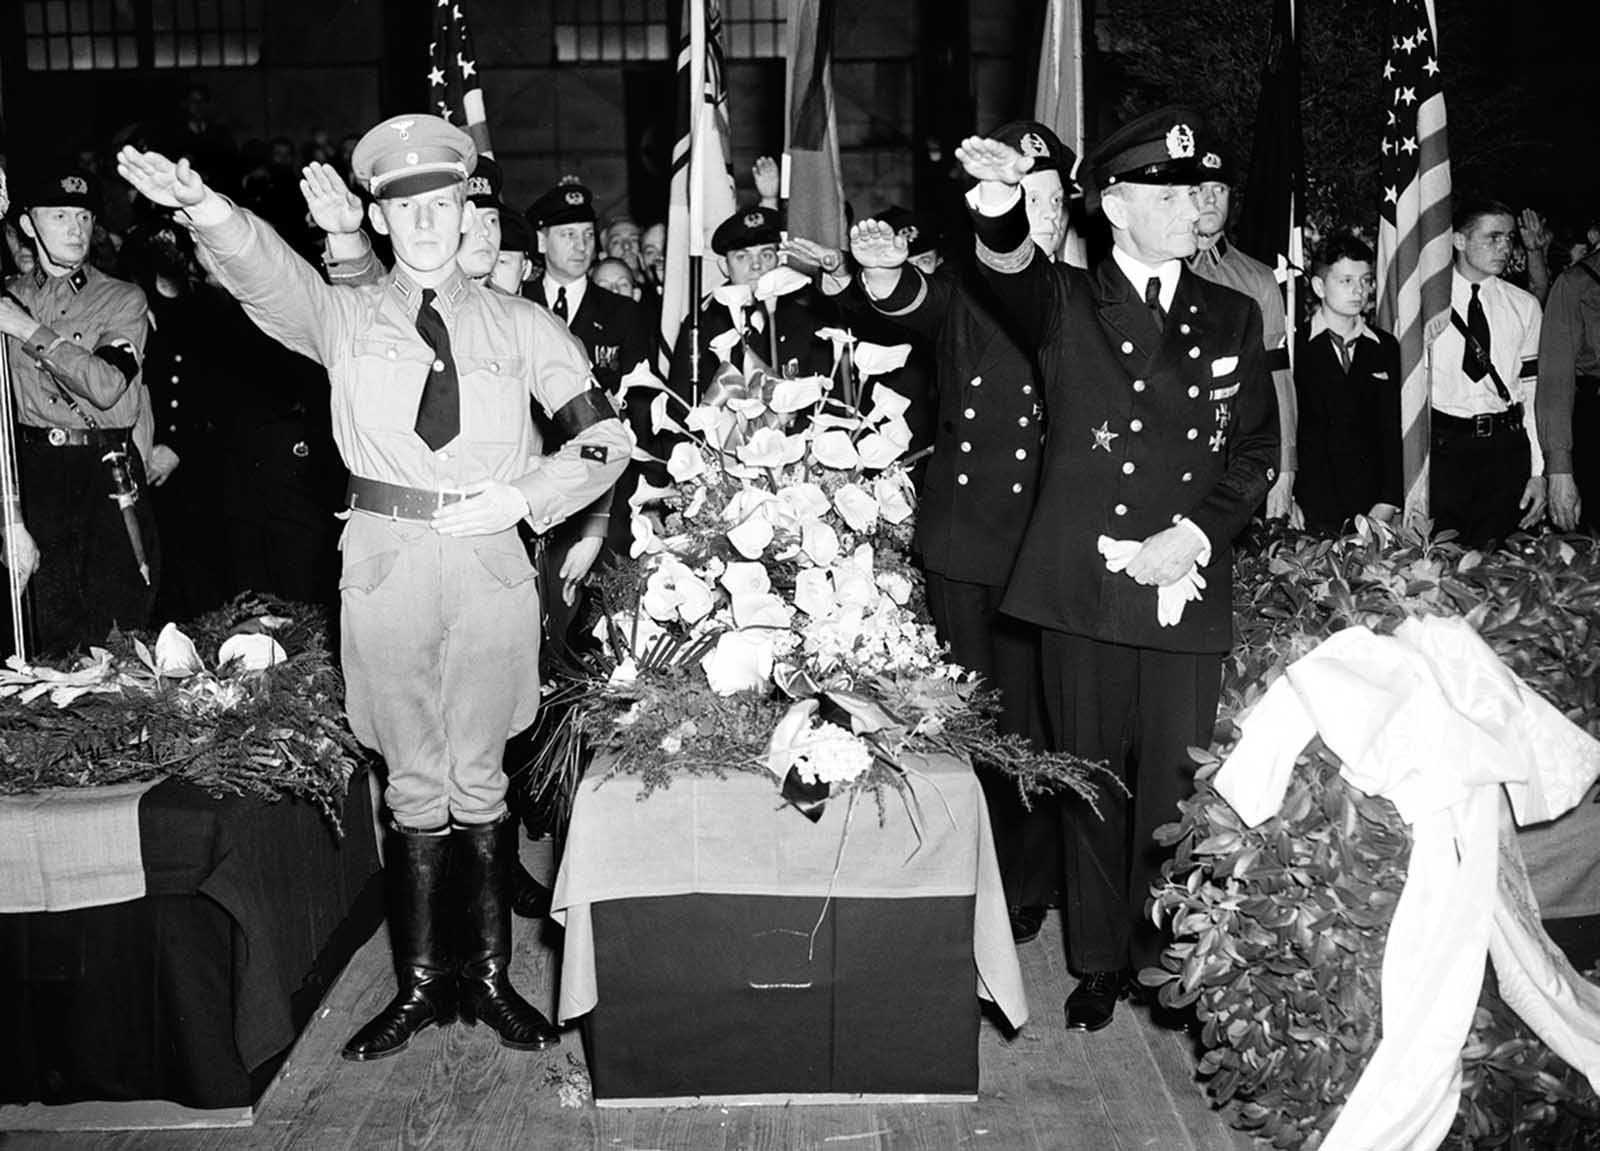 German soldiers give the salute as they stand beside the casket of Capt. Ernest A. Lehmann, former commander of the zeppelin Hindenburg, during funeral services held on the Hamburg-American pier in New York City, on May 11, 1937. The swastika-draped caskets were placed on board the SS Hamburg for their return to Europe. 